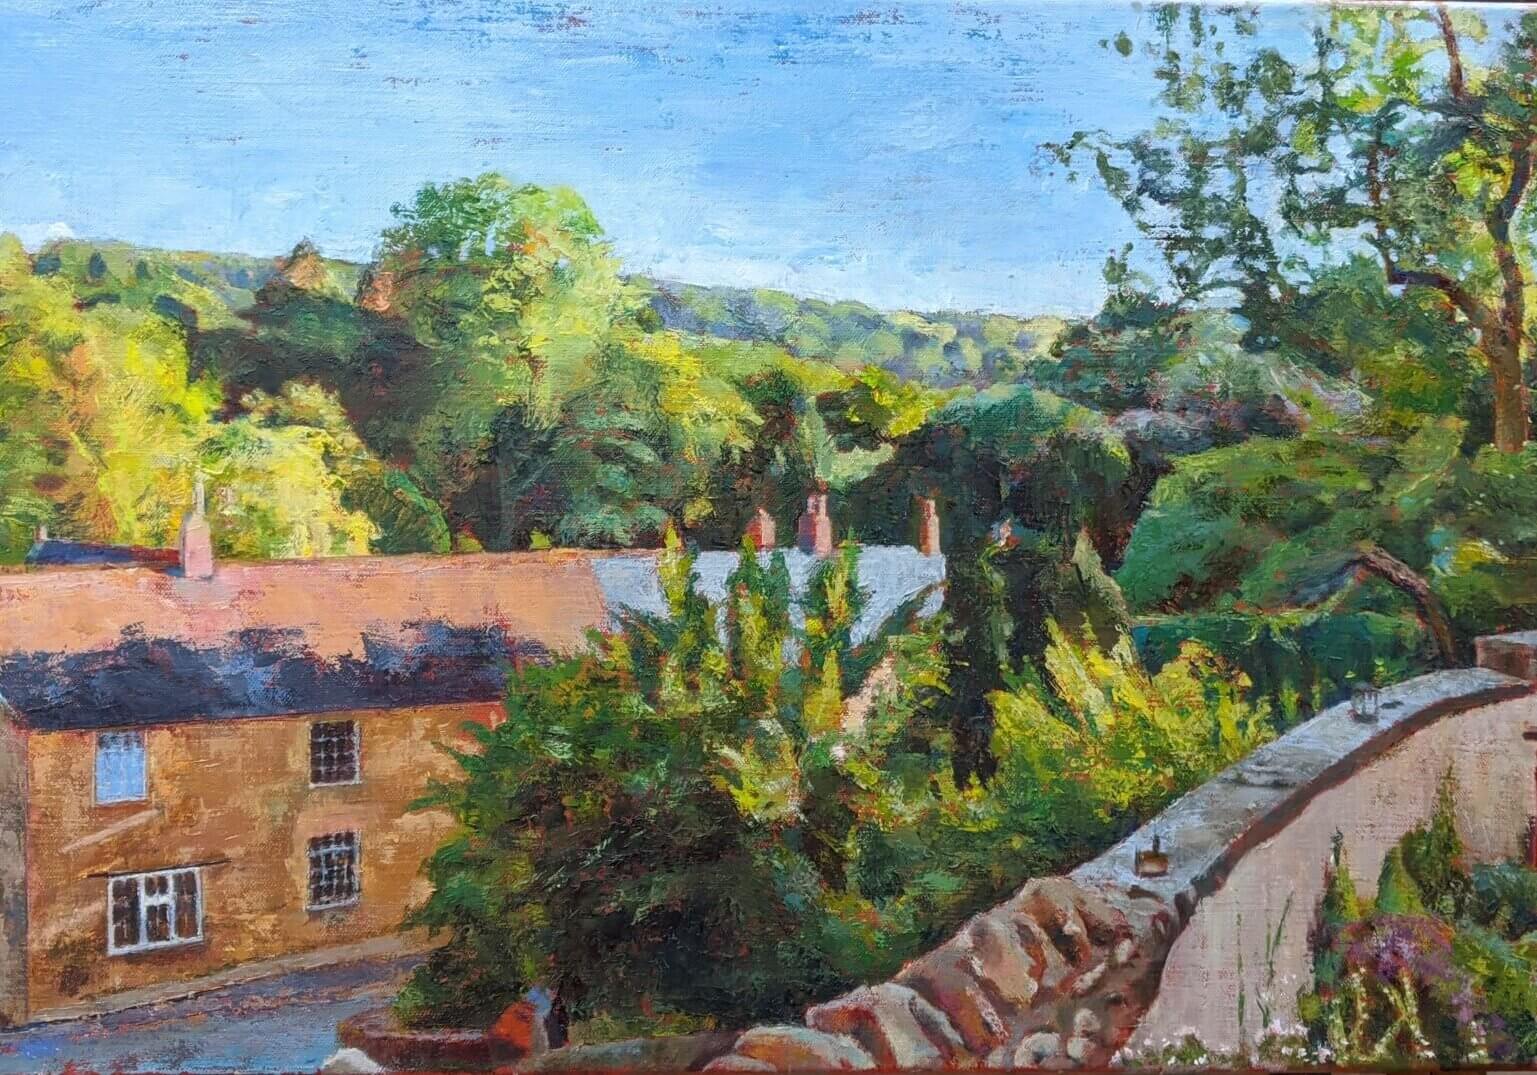 Commission - View of Coleford Vale, Somerset